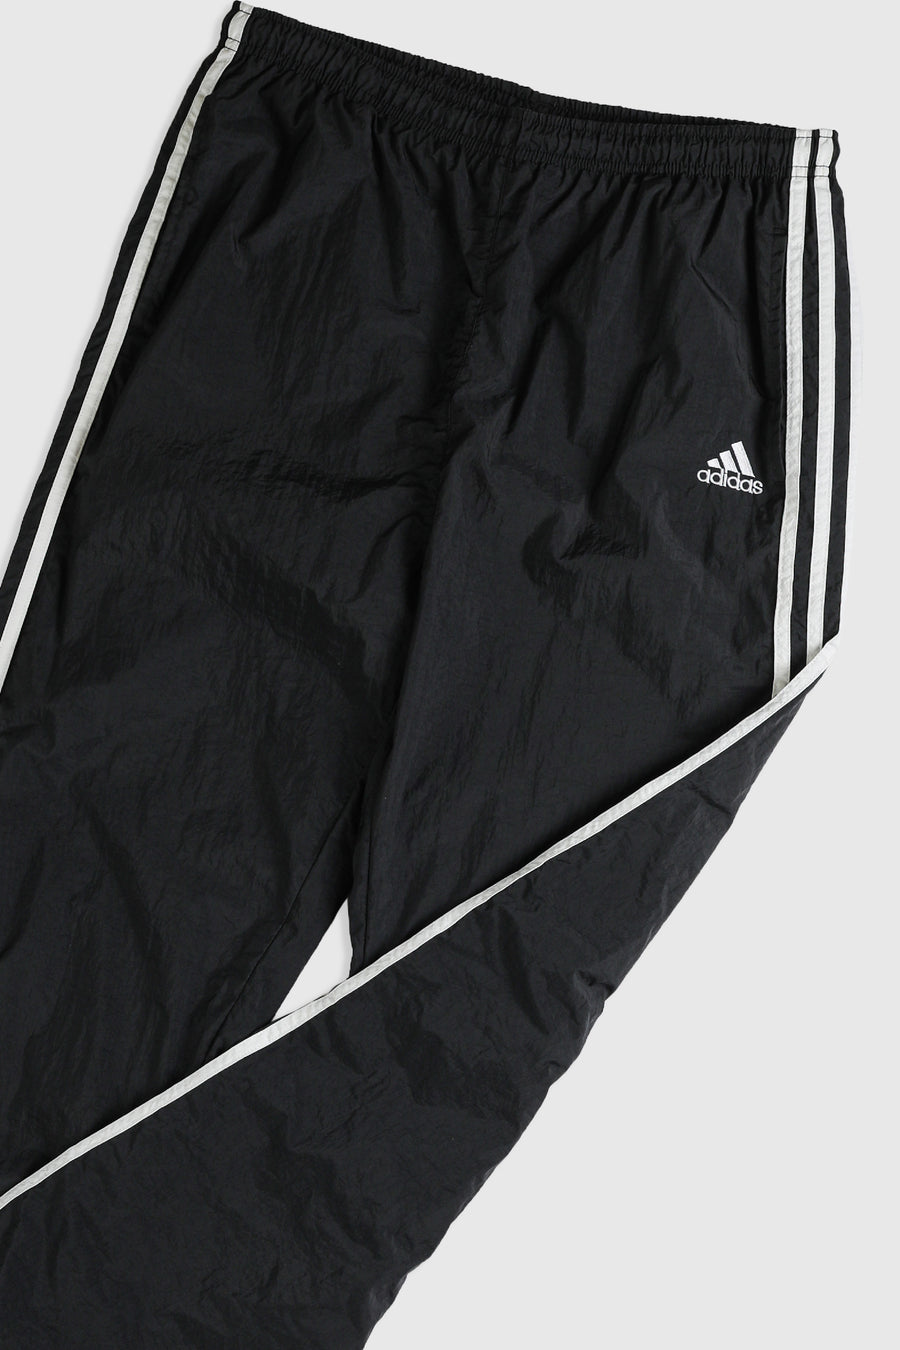 Adidas GLOBE Wind Track Pants GD2090, Men's Fashion, Bottoms, Joggers on  Carousell